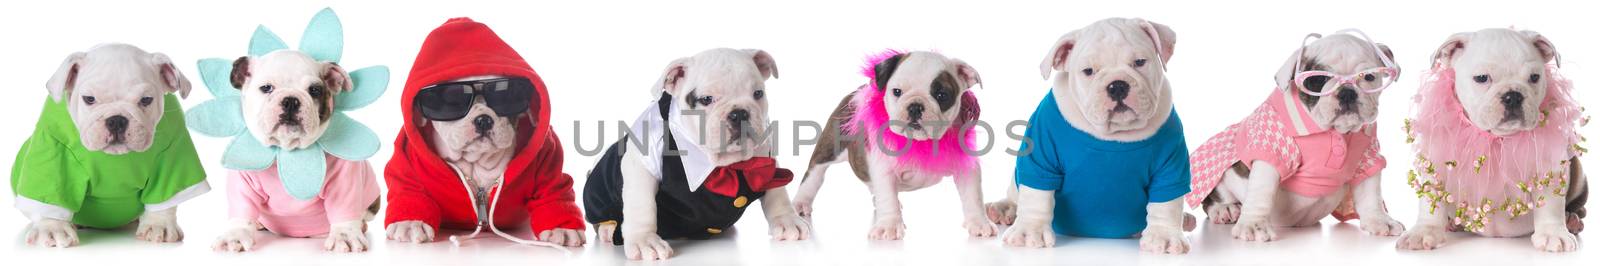 litter of bulldog puppies dressed up in costumes - 8 weeks old